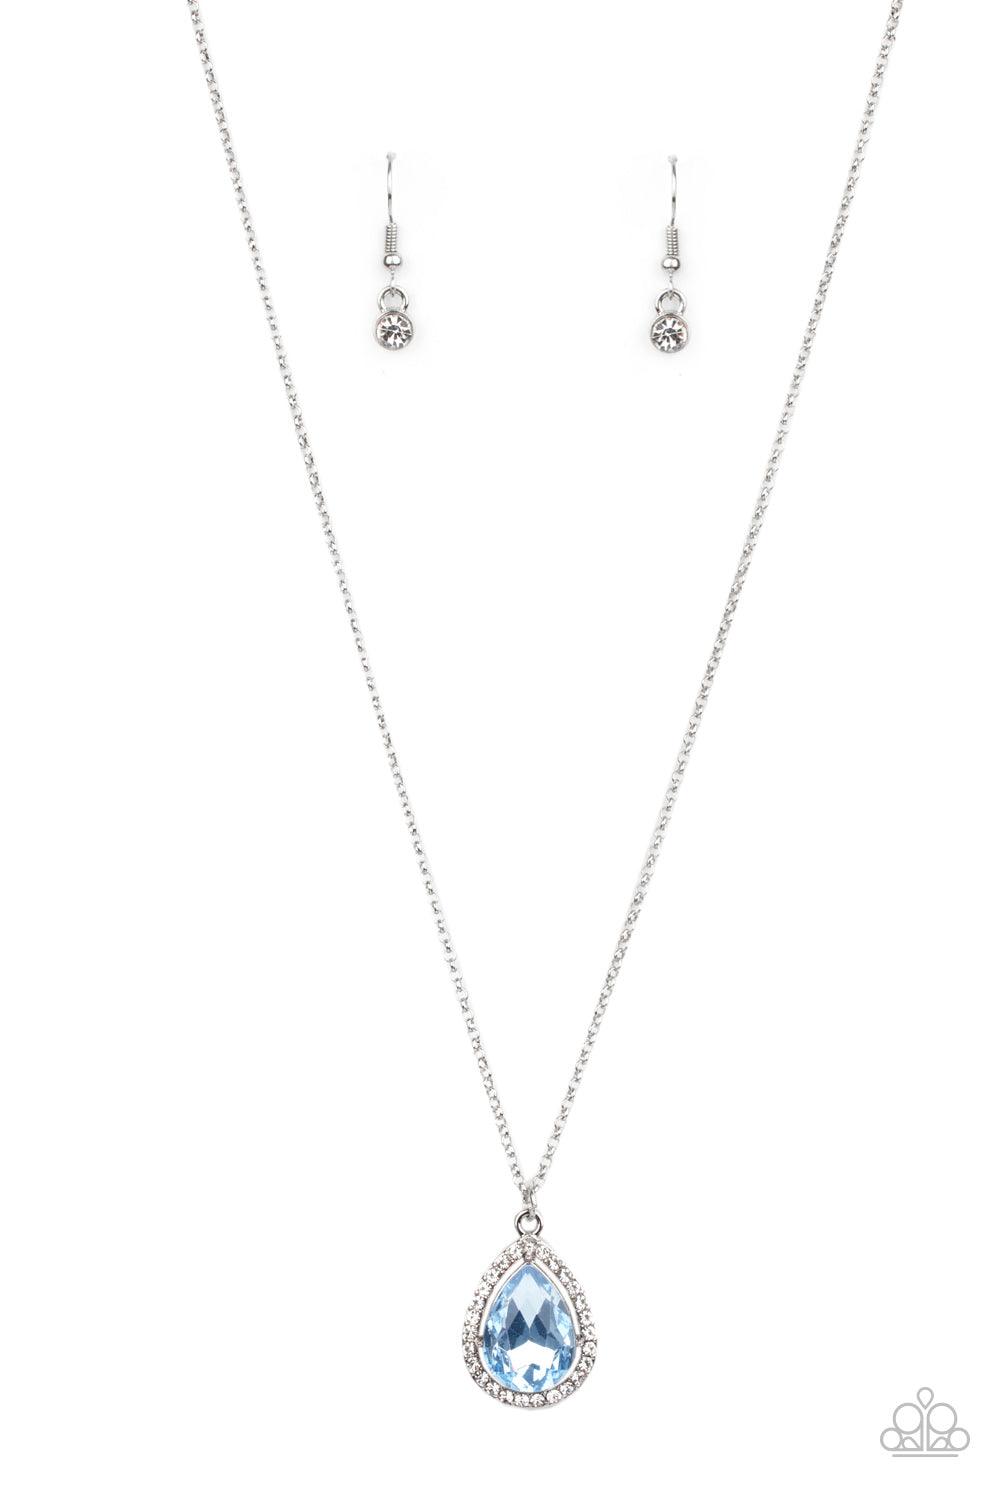 Paparazzi Accessories Duchess Decorum - Blue An oversized Cerulean rhinestone teardrop is pressed into the center of a silver frame bordered in white rhinestones, creating a glamorous pendant below the collar. Features an adjustable clasp closure. Sold as